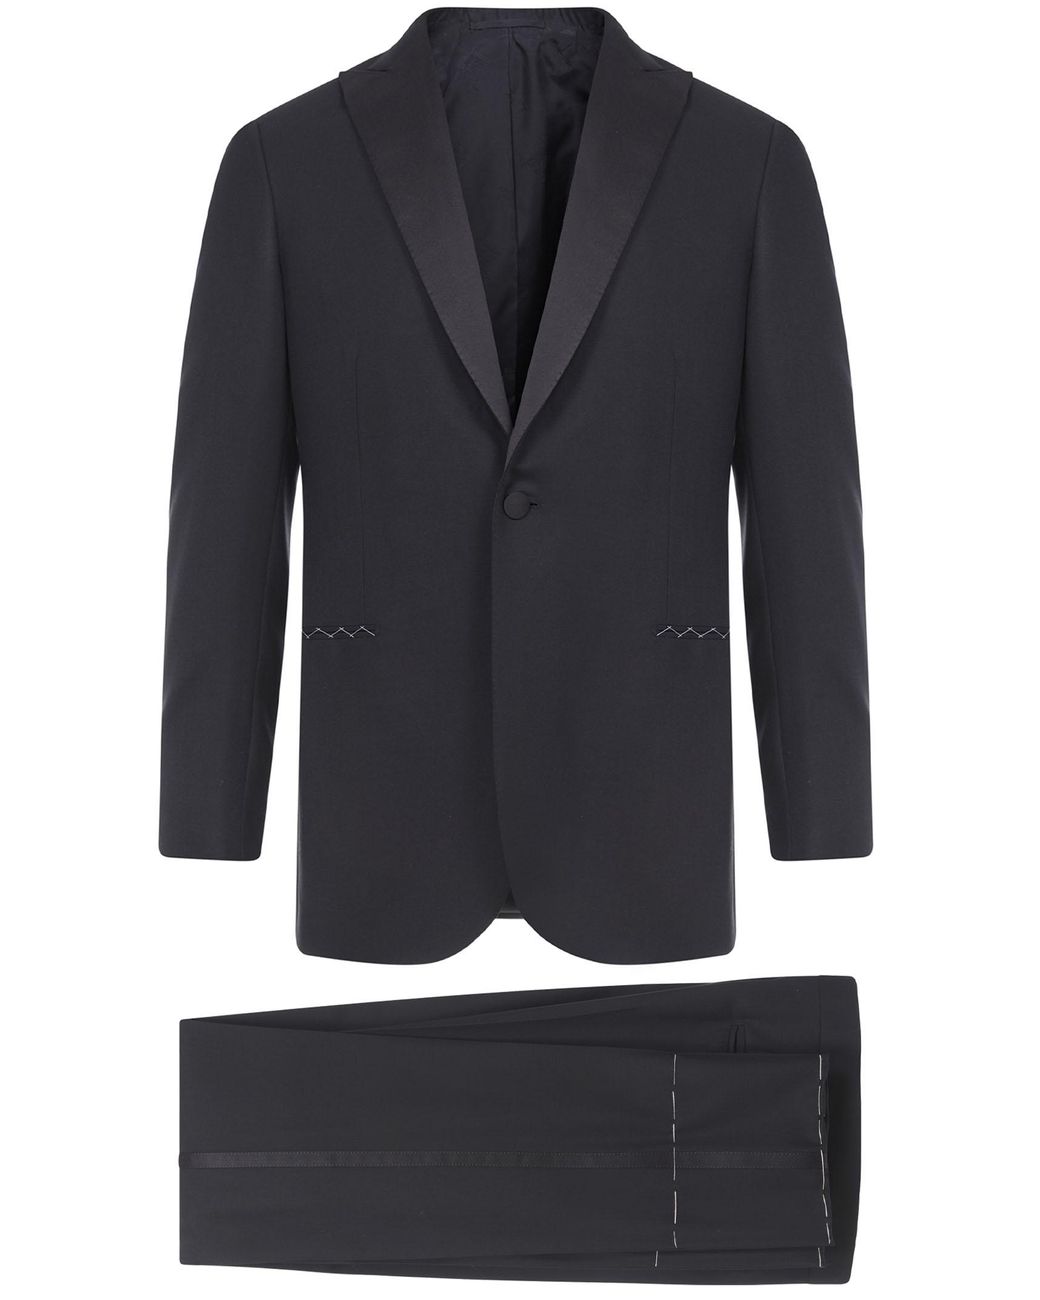 Brioni Satin Hand-tailored Black Super 160's Wool Policleto Tuxedo With ...